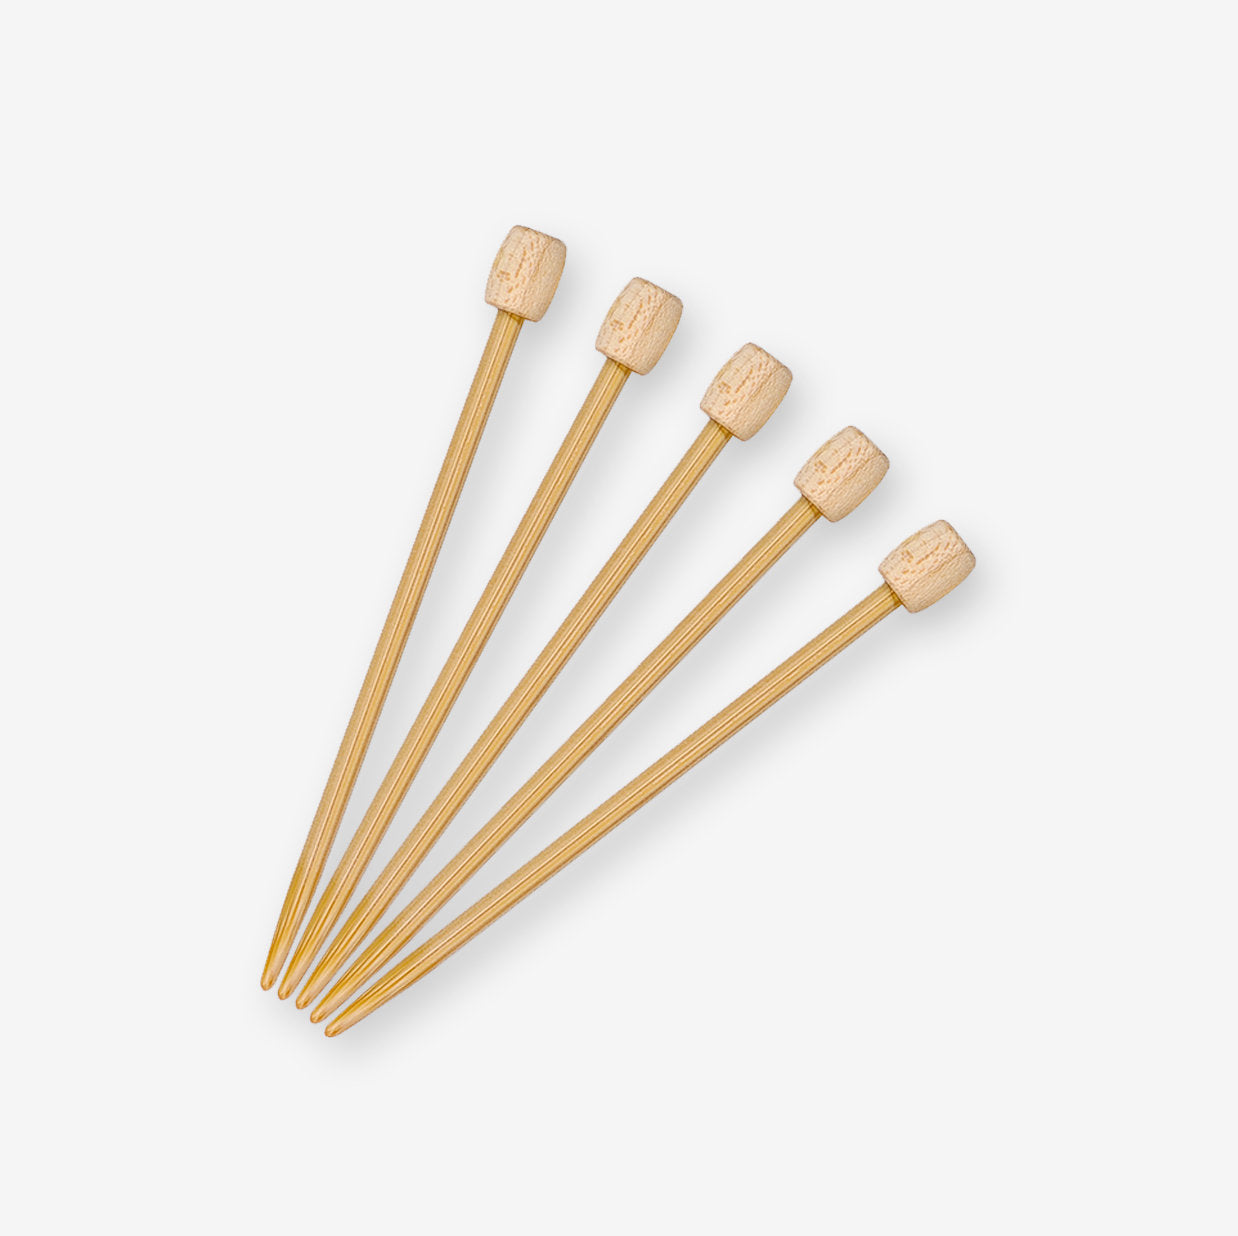 Clover 3143 Bamboo Pins for Weaving Marking | Set of 10 7 cm pins